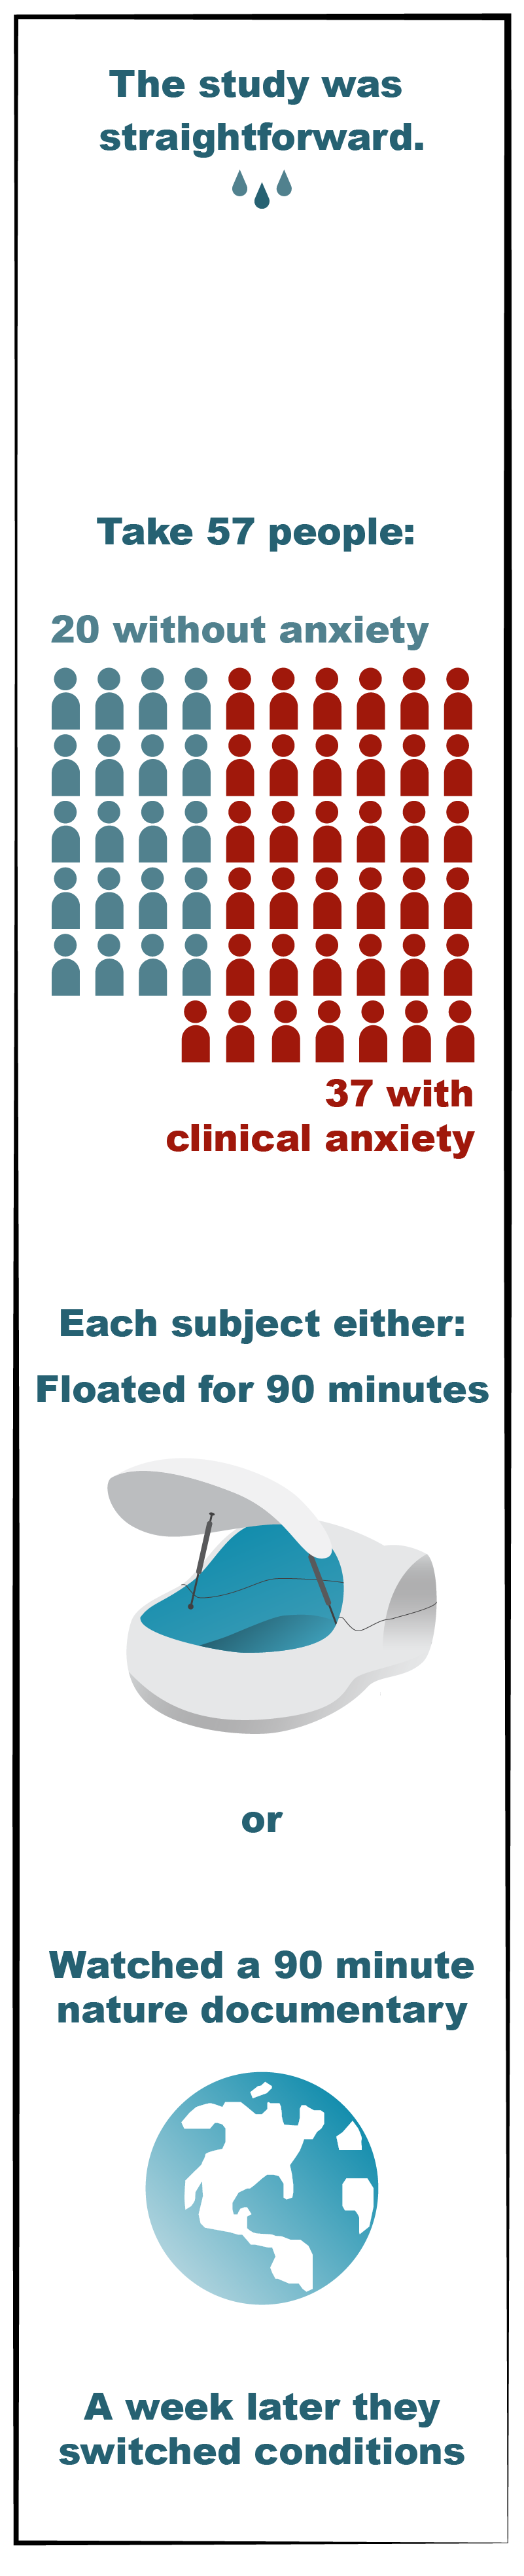 Dr. Feinstein's study used patients with and without anxiety and had them float.